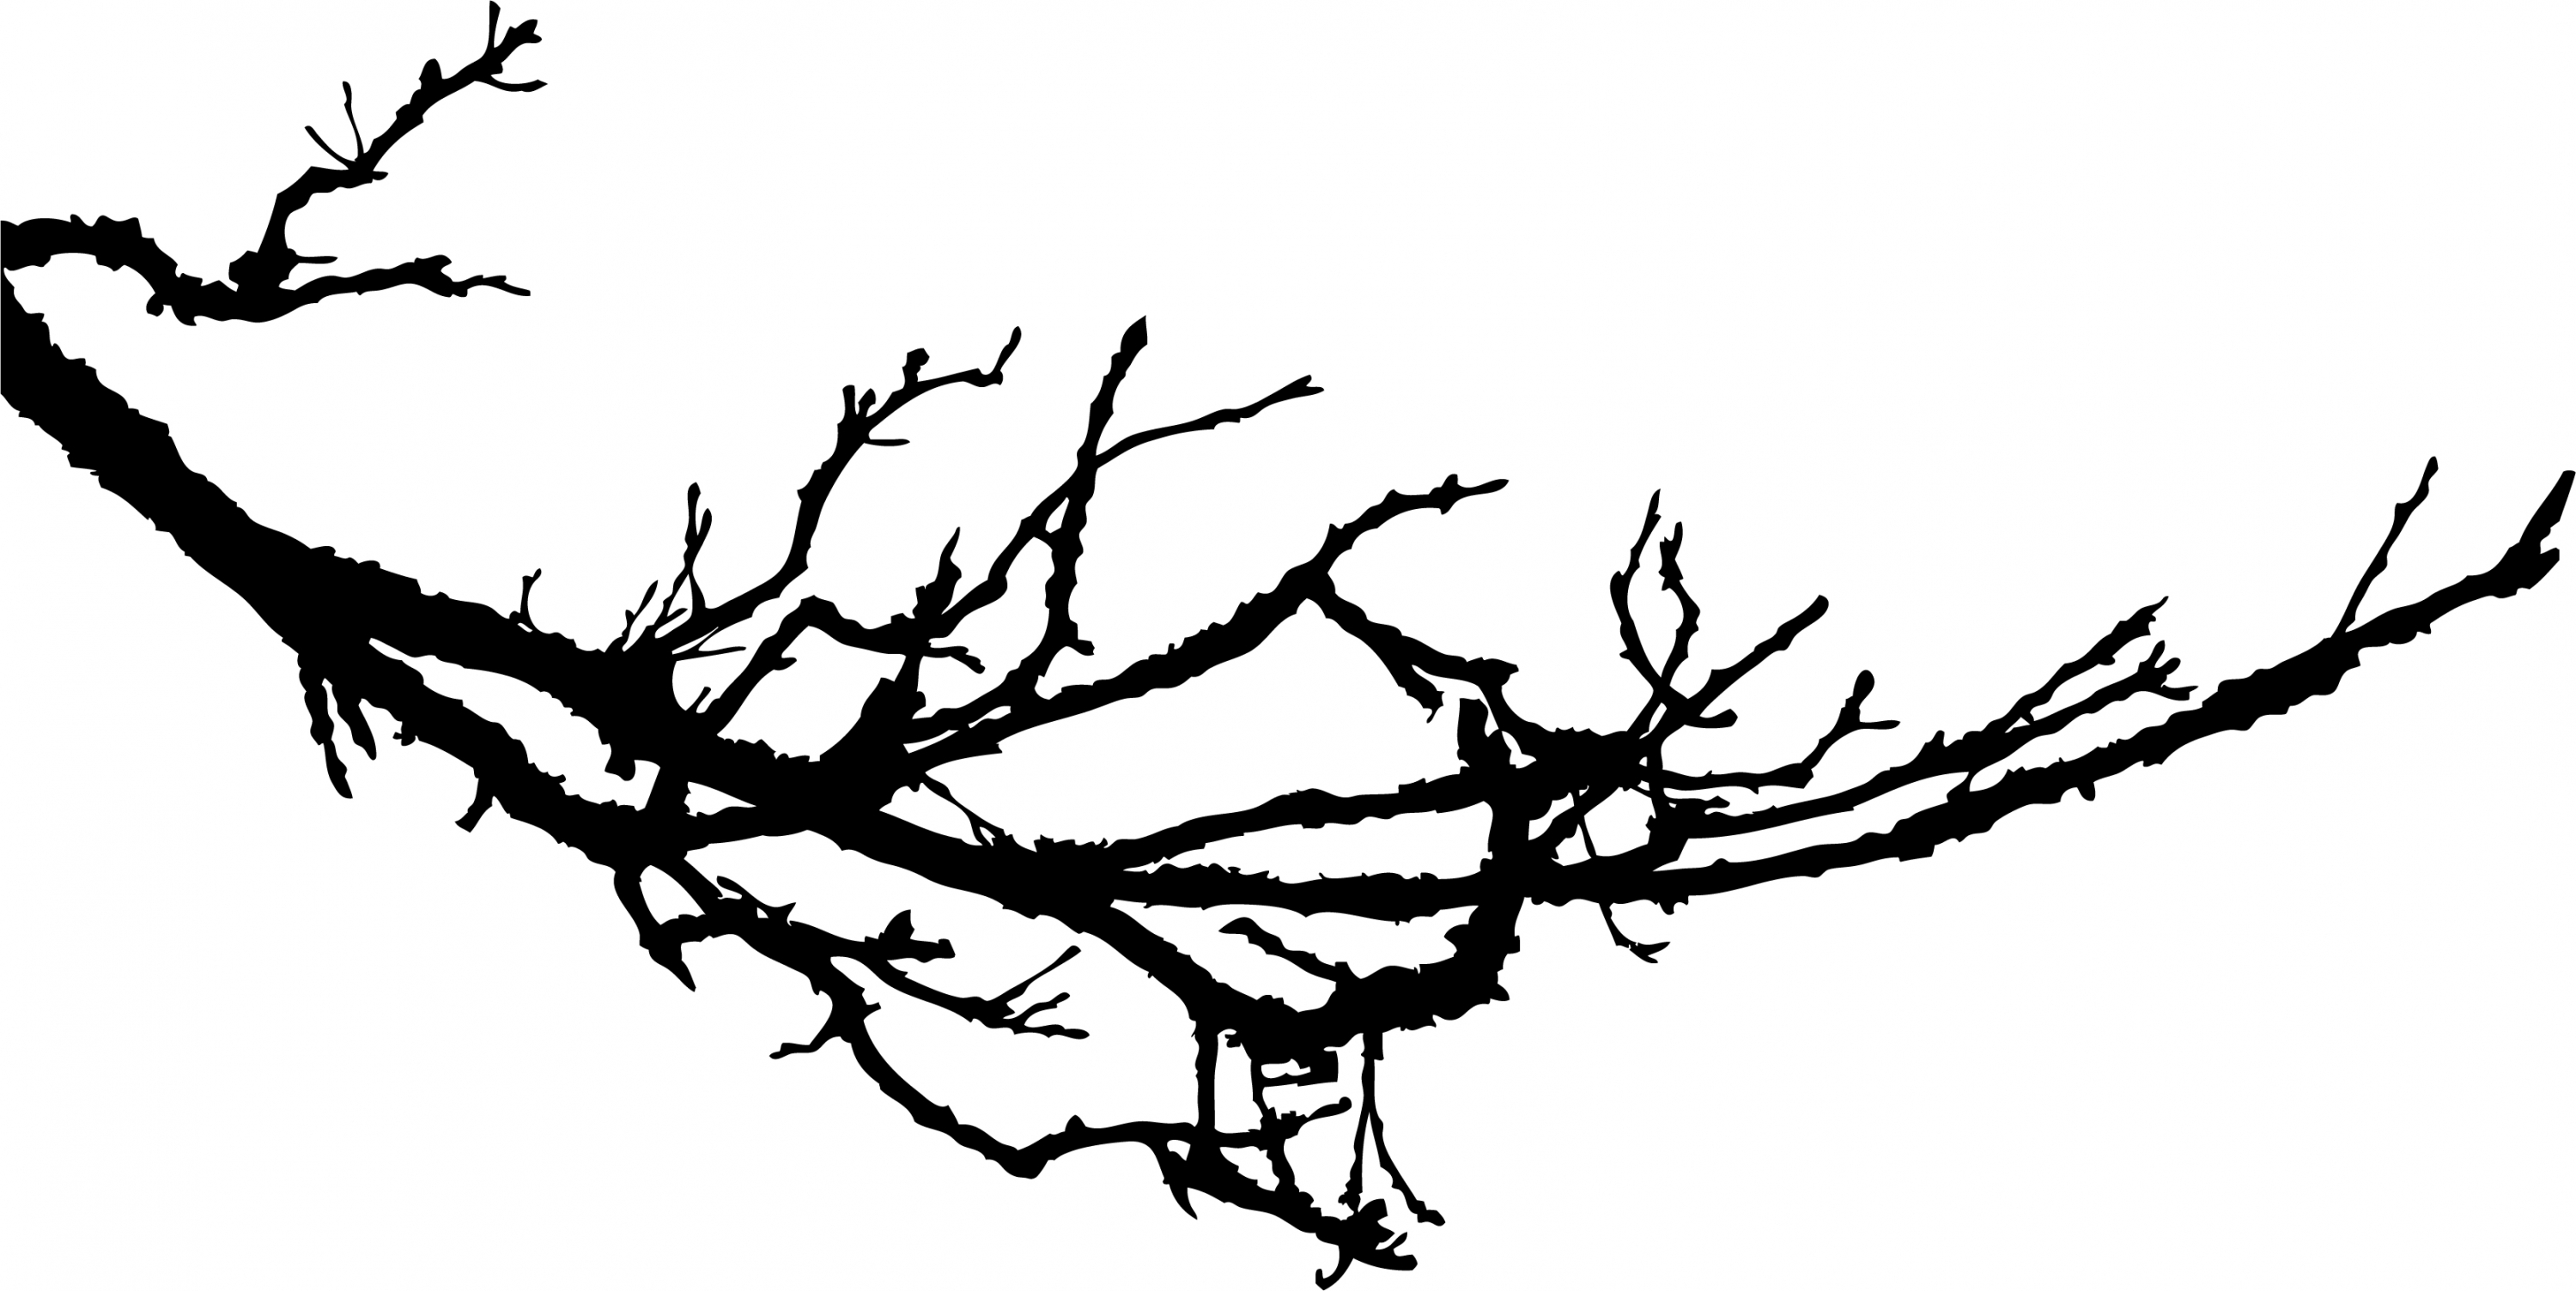 Picture Of A Tree Branch 